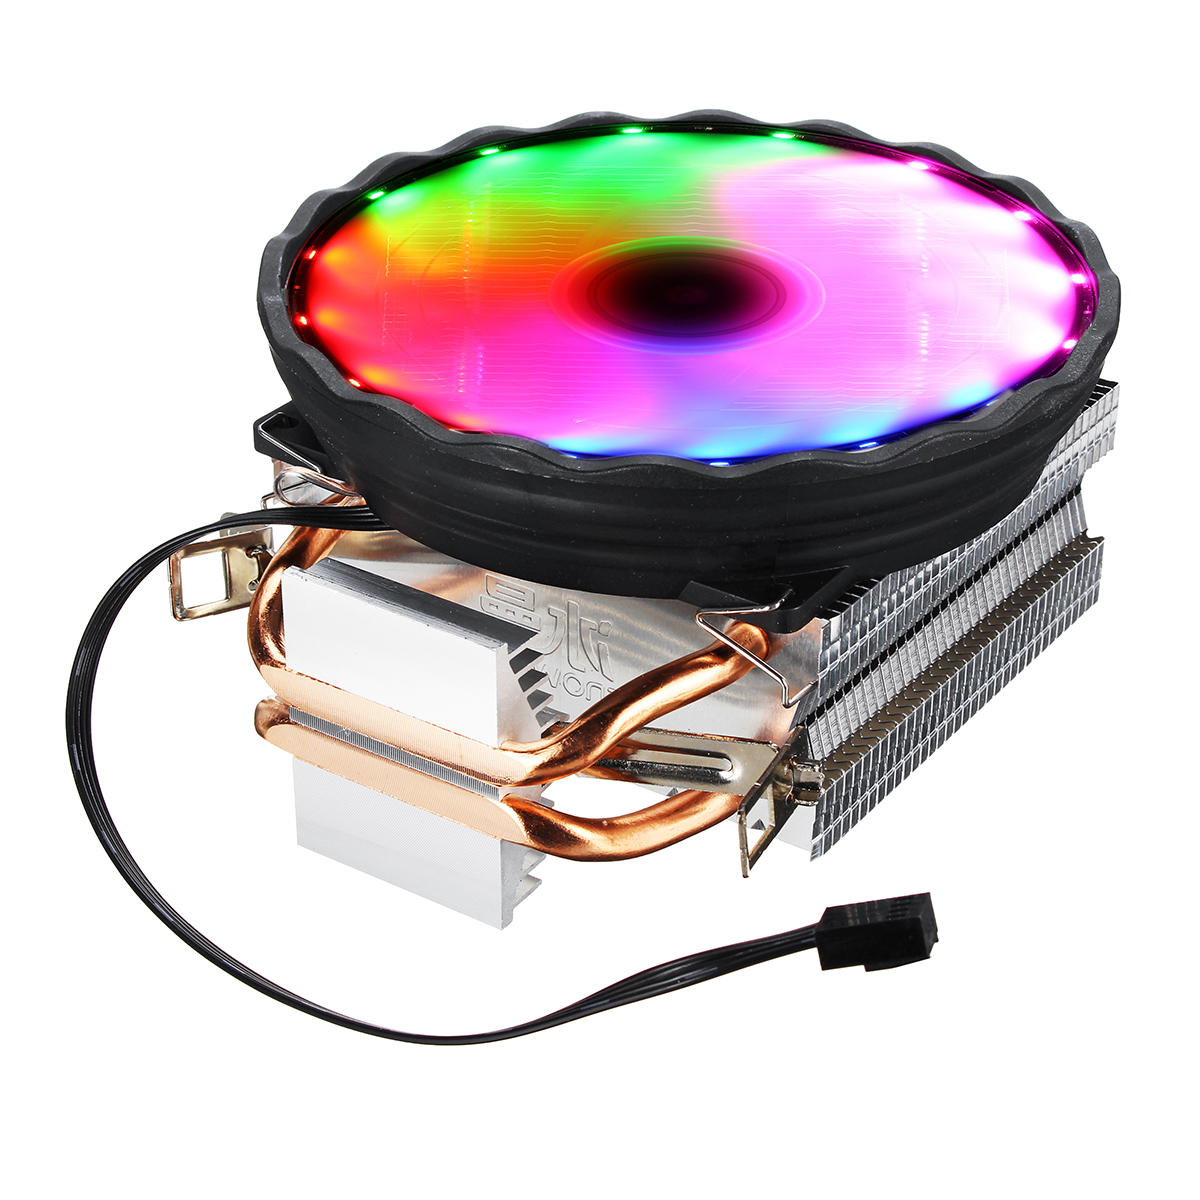 

DC 12V Colorful Backlight 120mm CPU Cooling Fan PC Heatsink for Intel/AMD For PC Computer Case